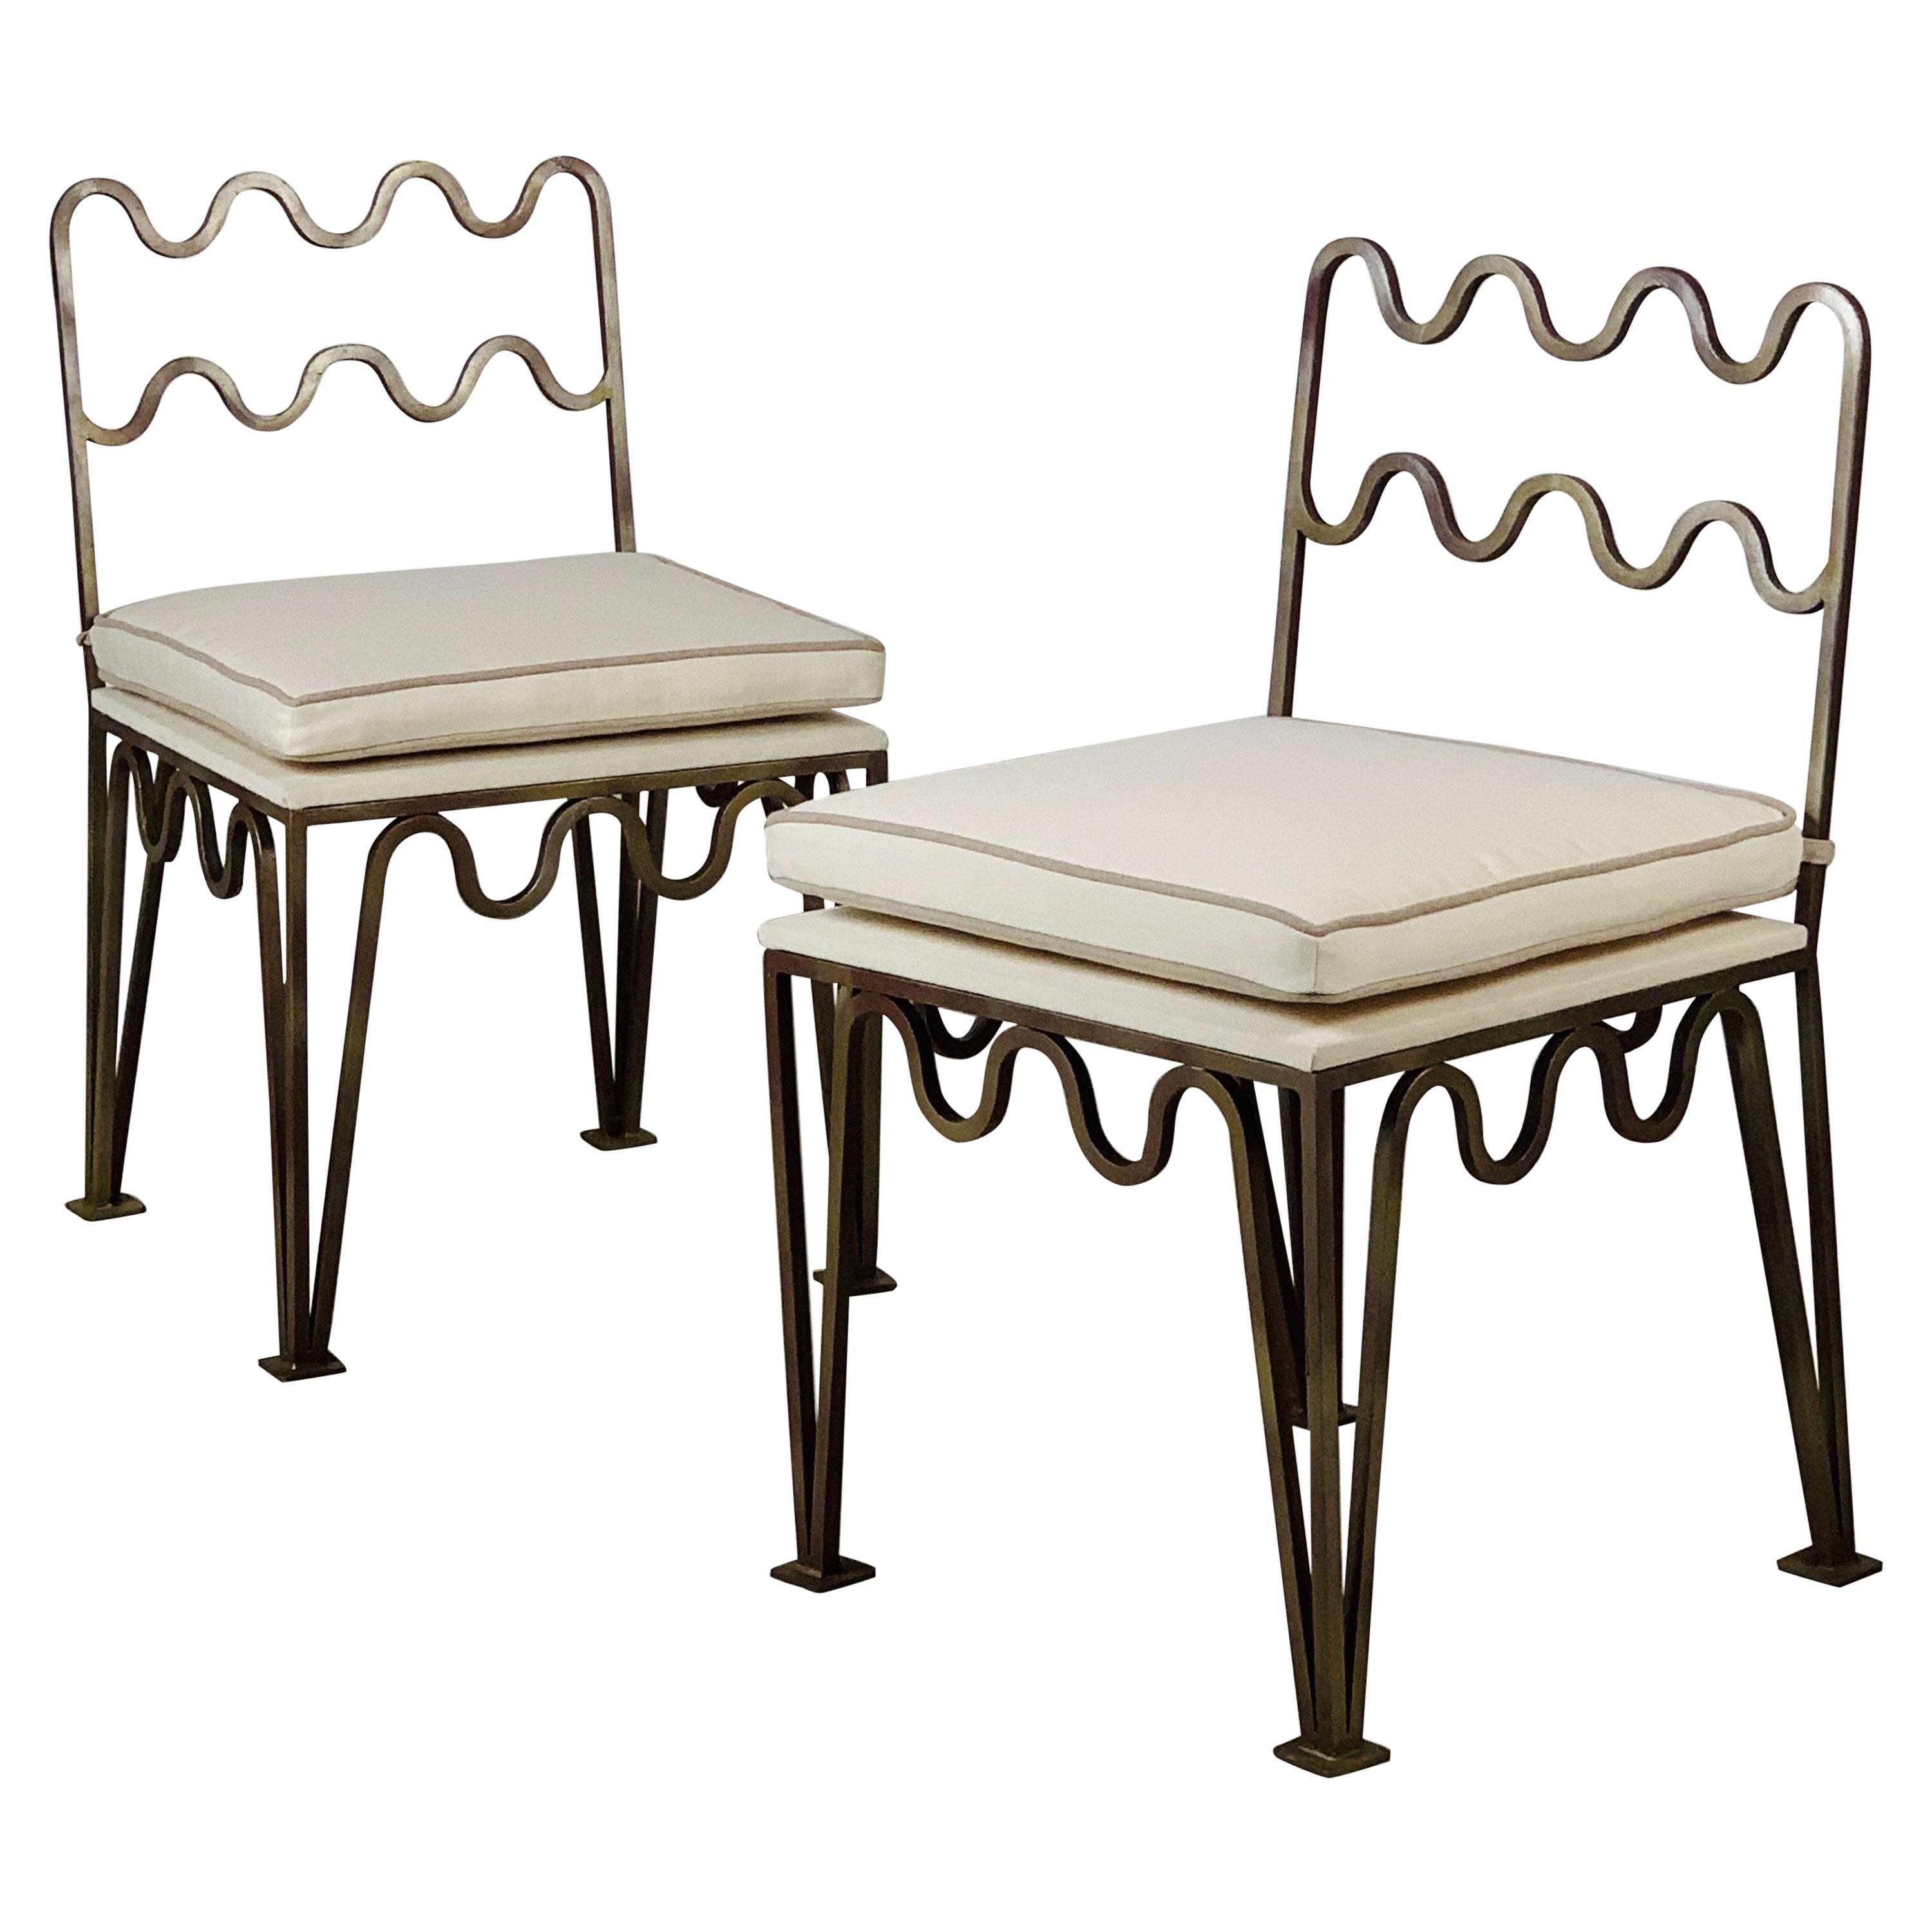 Pair of Chic 'Méandre' Side Chairs by Design Frères